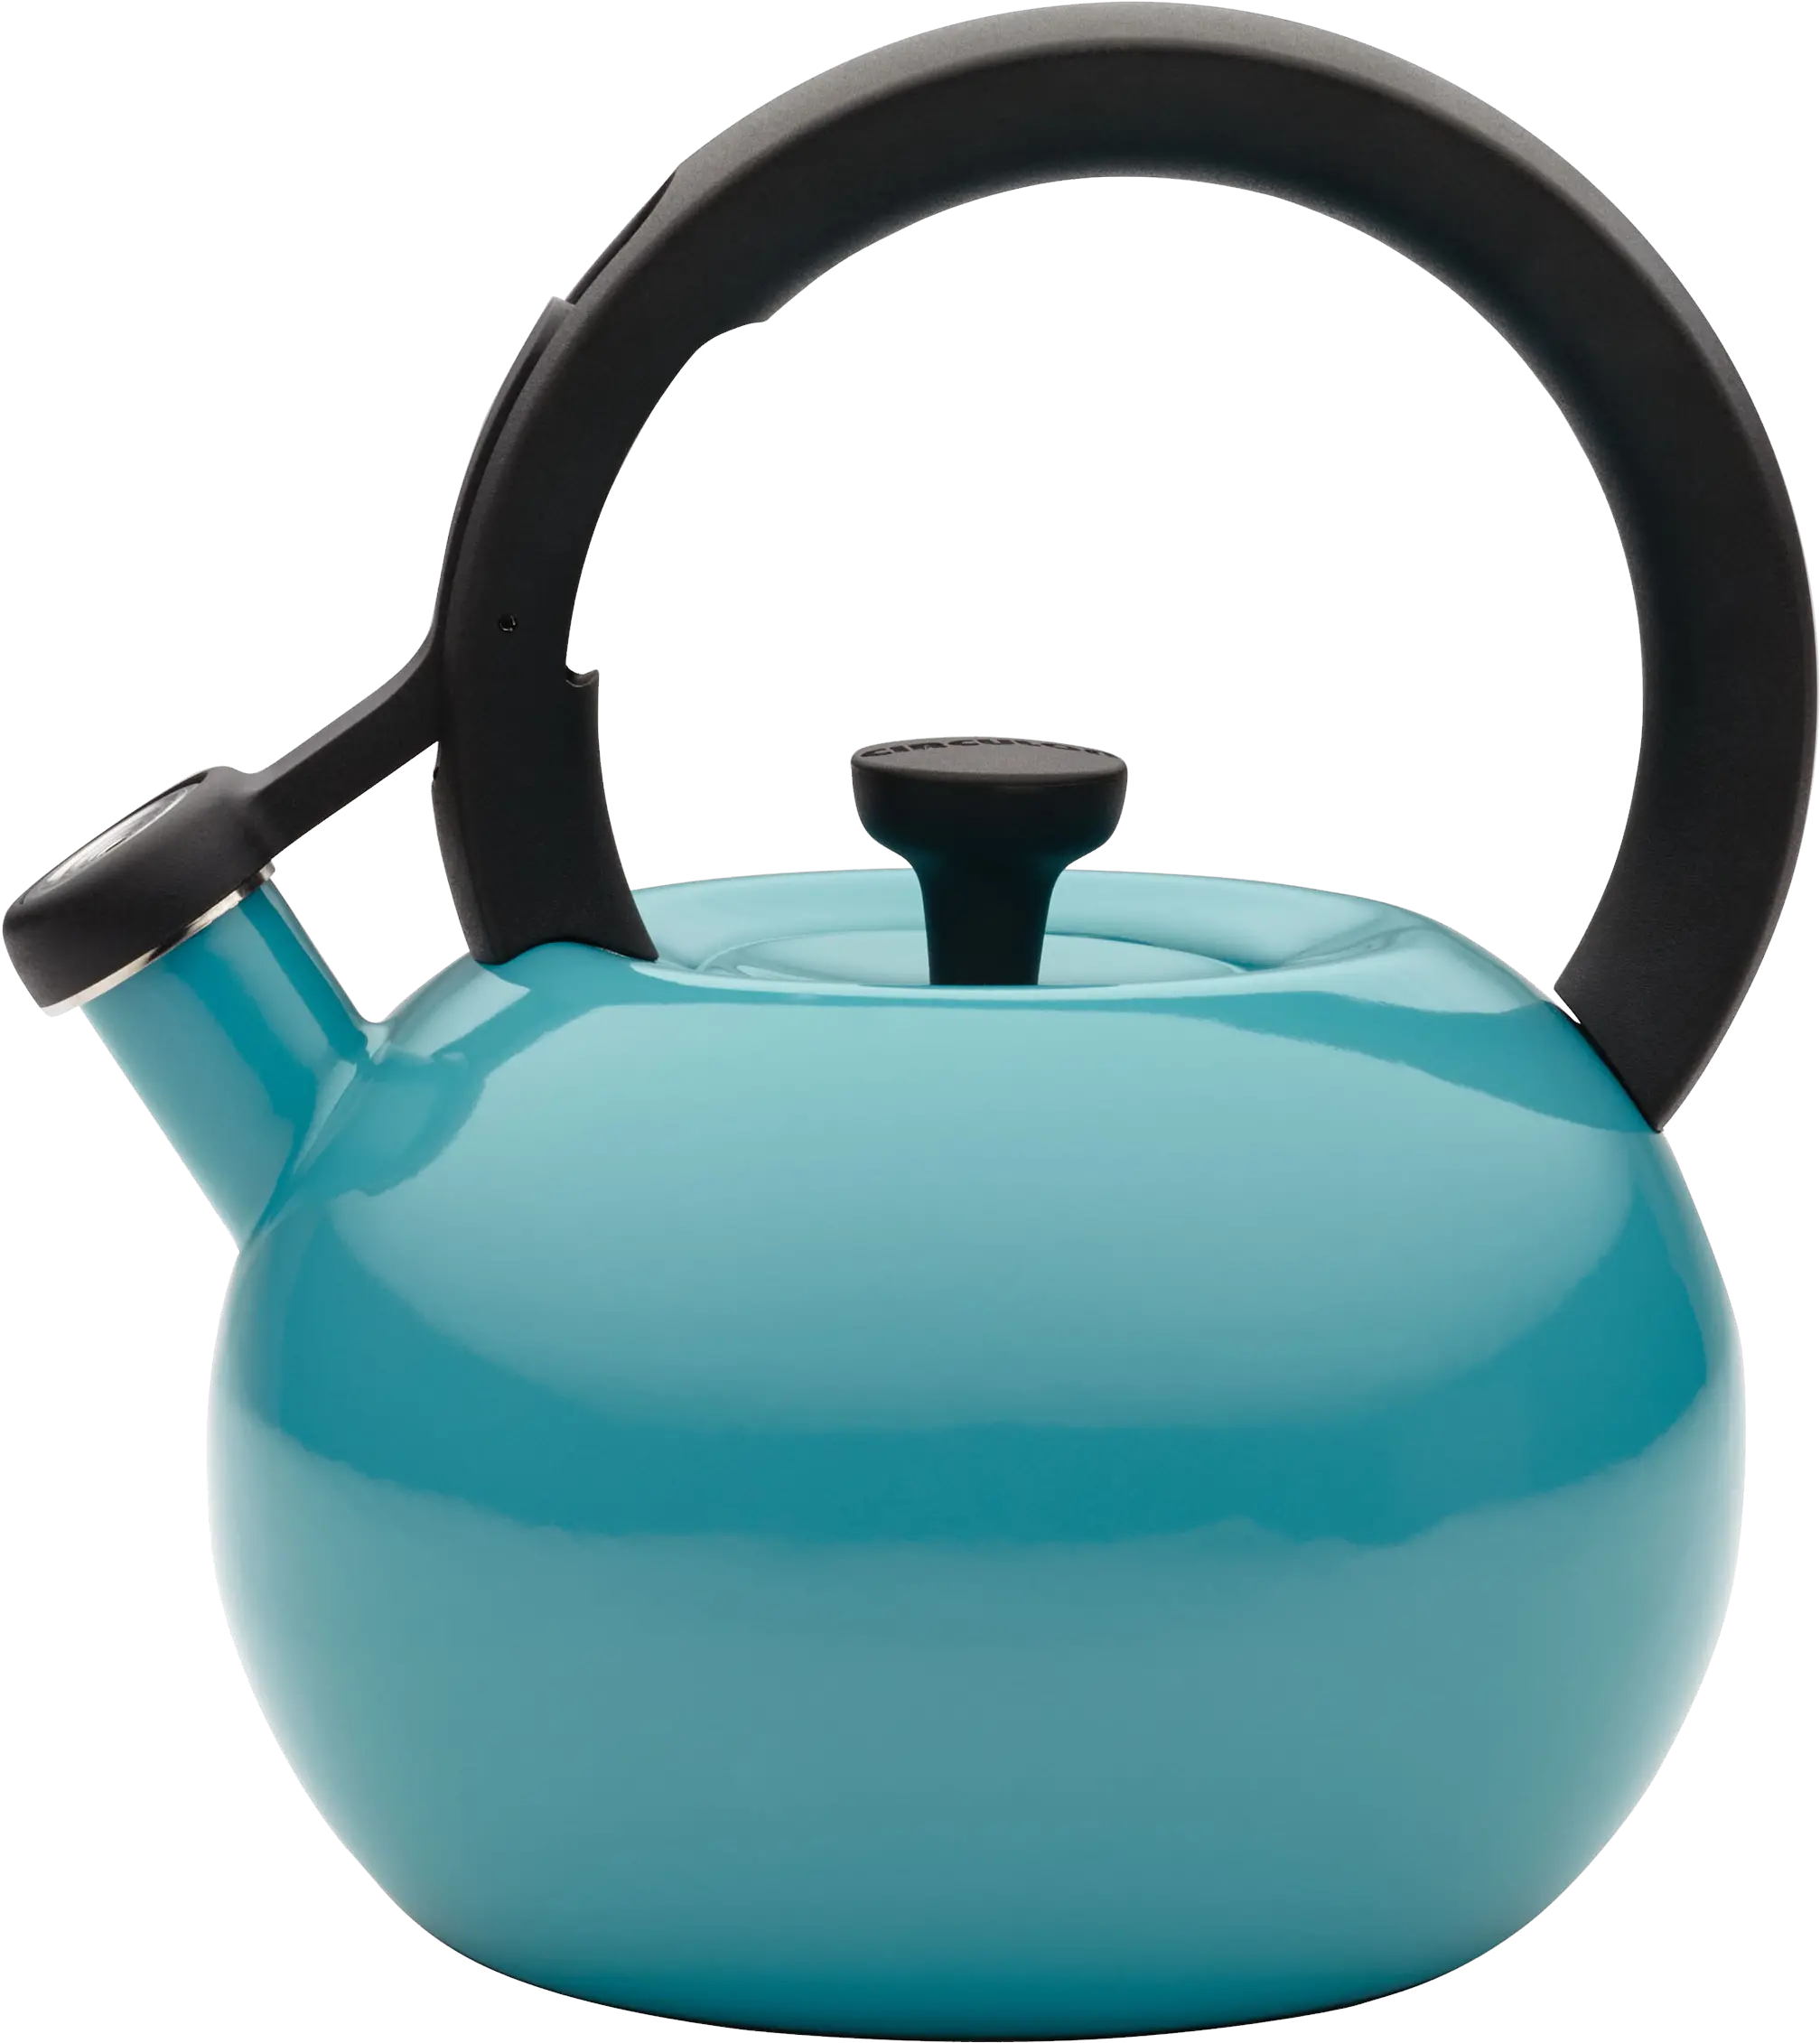 Kettle Png Image Free Download Tea Tea Kettle For Induction Stove Teapot Png